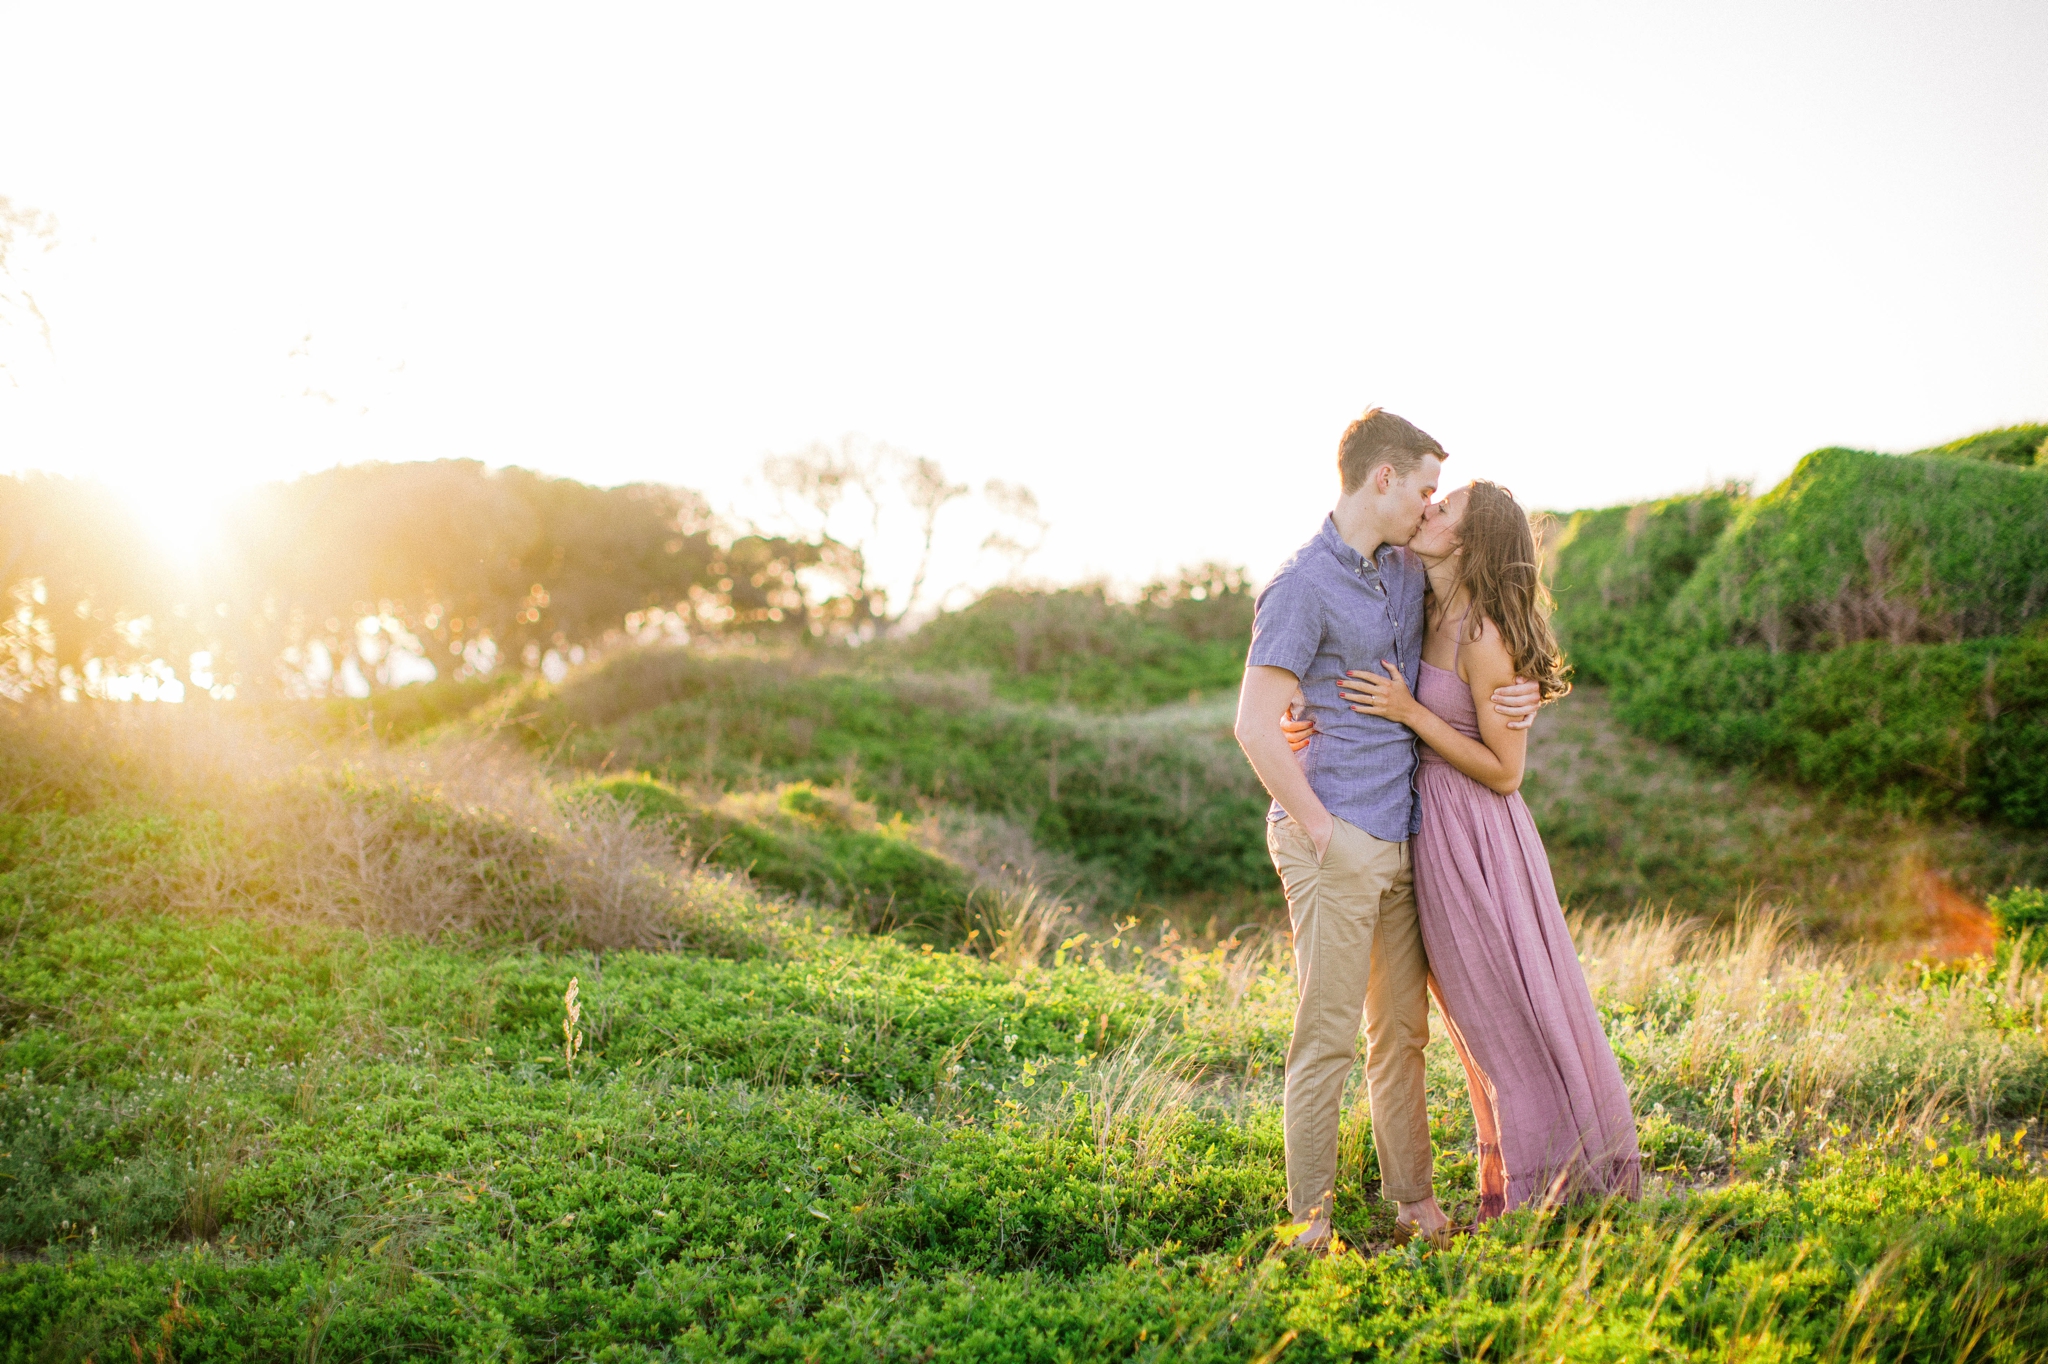  couple kissing in front of lush green dunes and hills with the sunset behind them  - Woman is in a flowy pastel maxi dress - outdoor golden light session - engagement photographer in honolulu, oahu, hawaii - johanna dye photography 